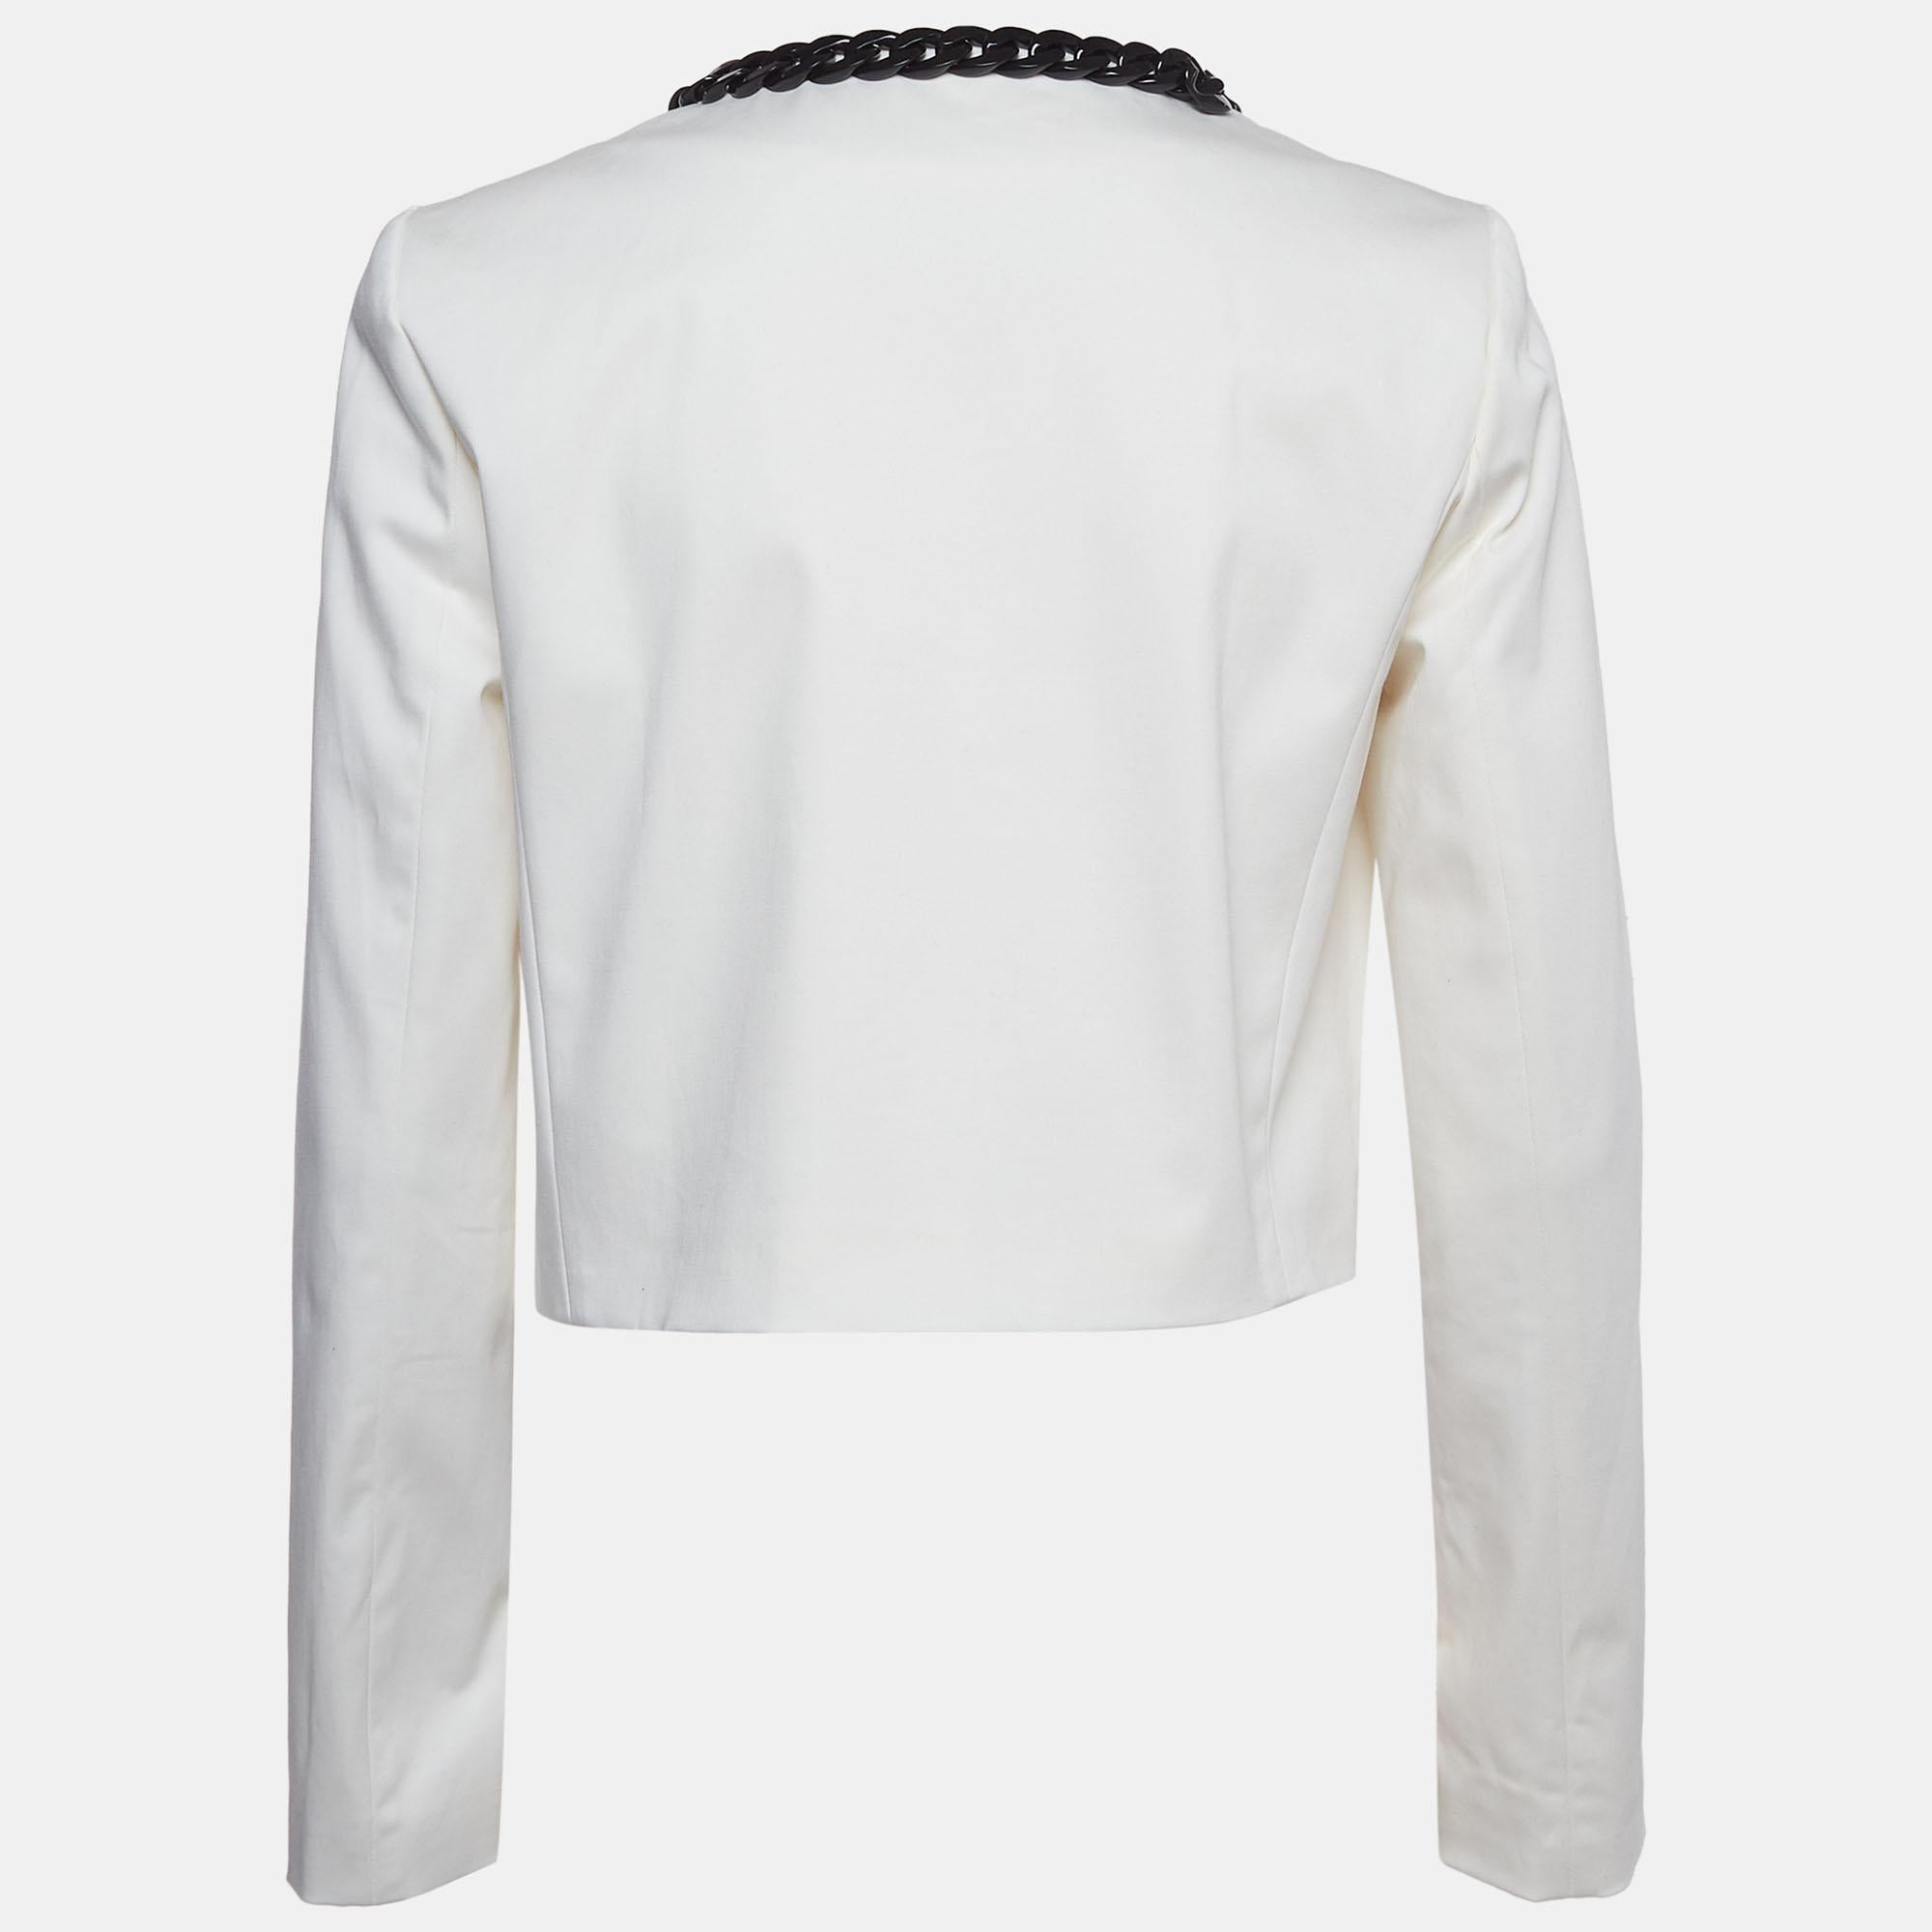 An elegant silhouette, smart fit, and perfect tailoring make this Love Moschino women's jacket a fine choice. It is made of quality materials, secured with front zip closure, and added with two pockets.

Includes: Price Tag